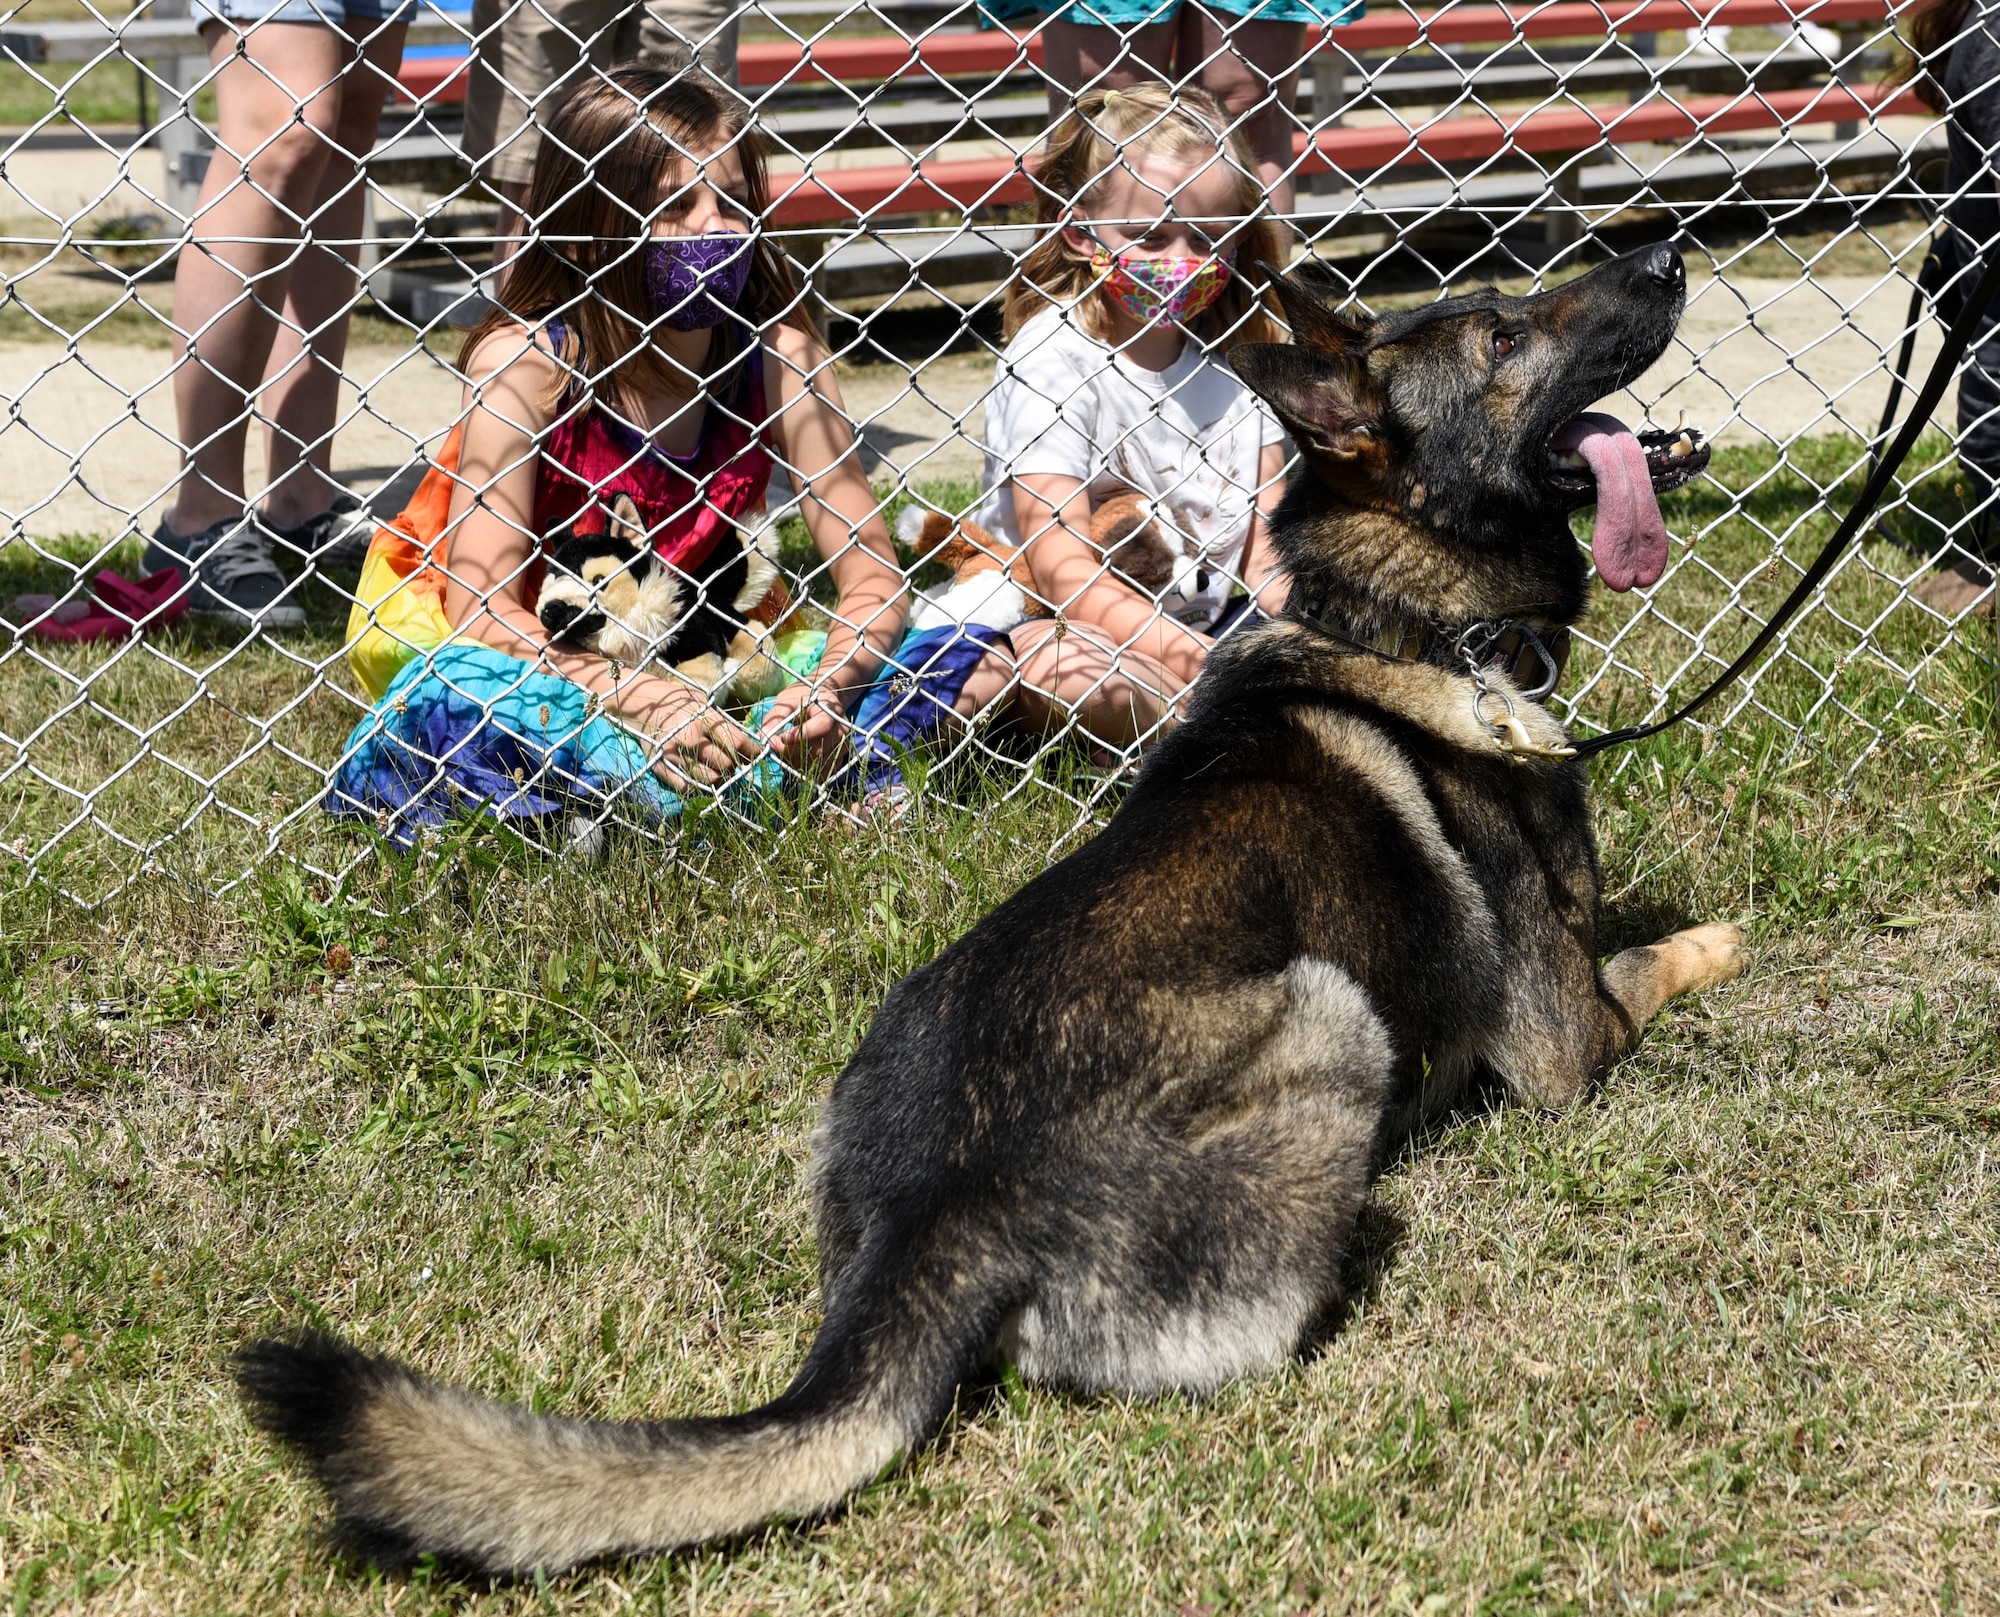 U.S. Air Force Military Working Dog Axel rests by children after training at Spangdahlem Air Base, Germany, July 22, 2020. Axel performed a variety of different intruder exercises during the demonstration hosted by the 52nd Security Forces Squadron MWD handlers for Spangdahlem AB families. (U.S. Air Force photo by Senior Airman Melody W. Howley)